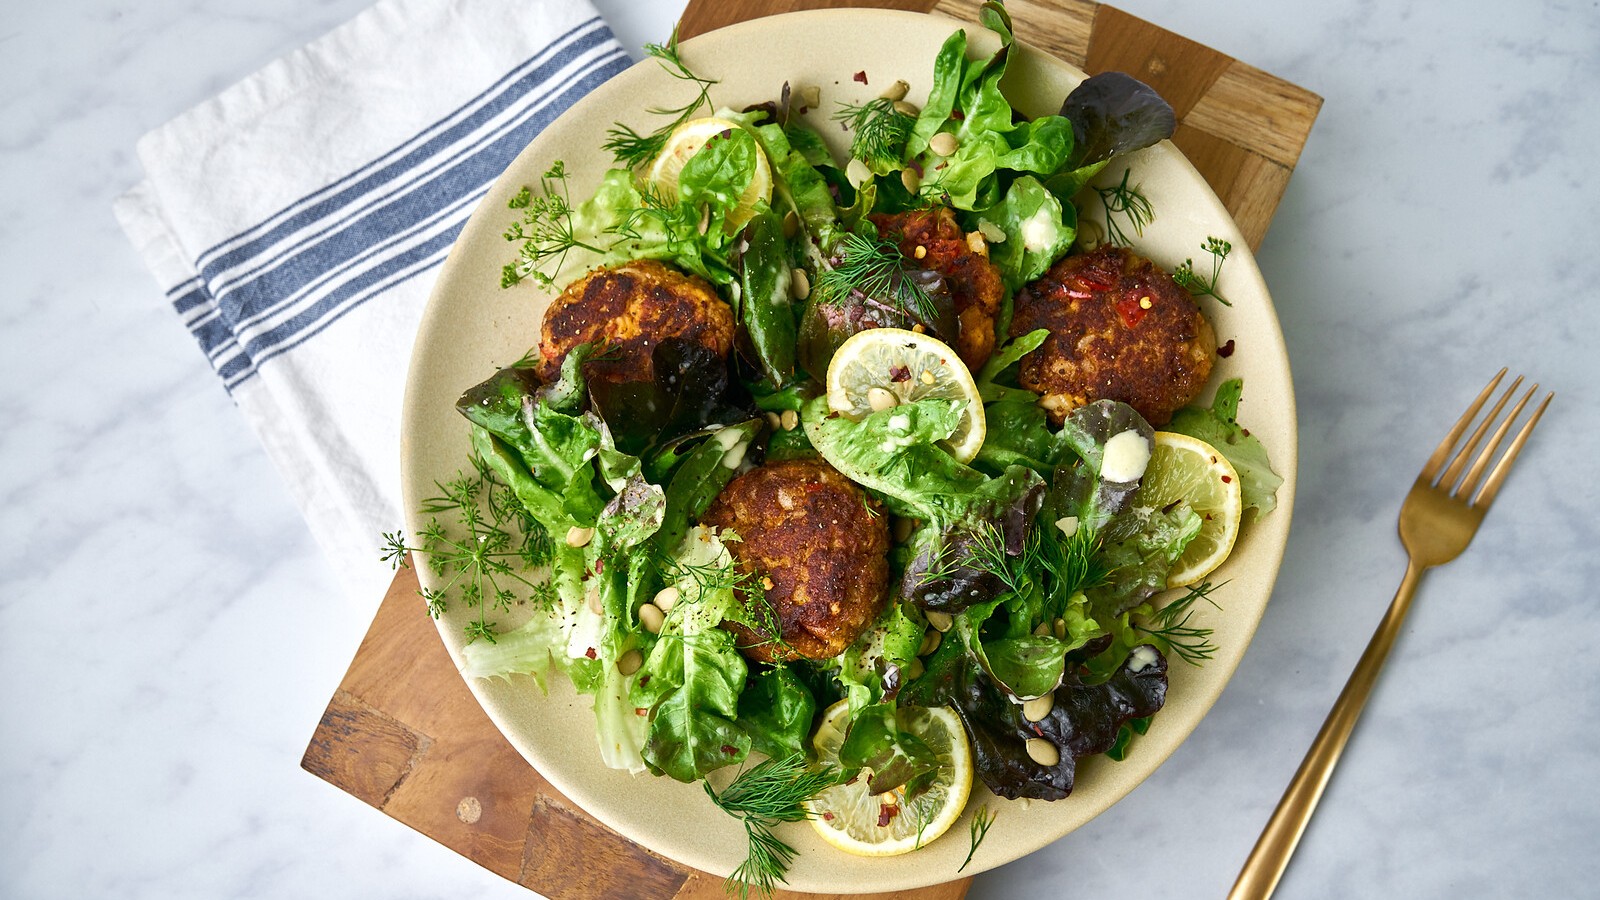 Image of Blackened Salmon Cakes with Greens